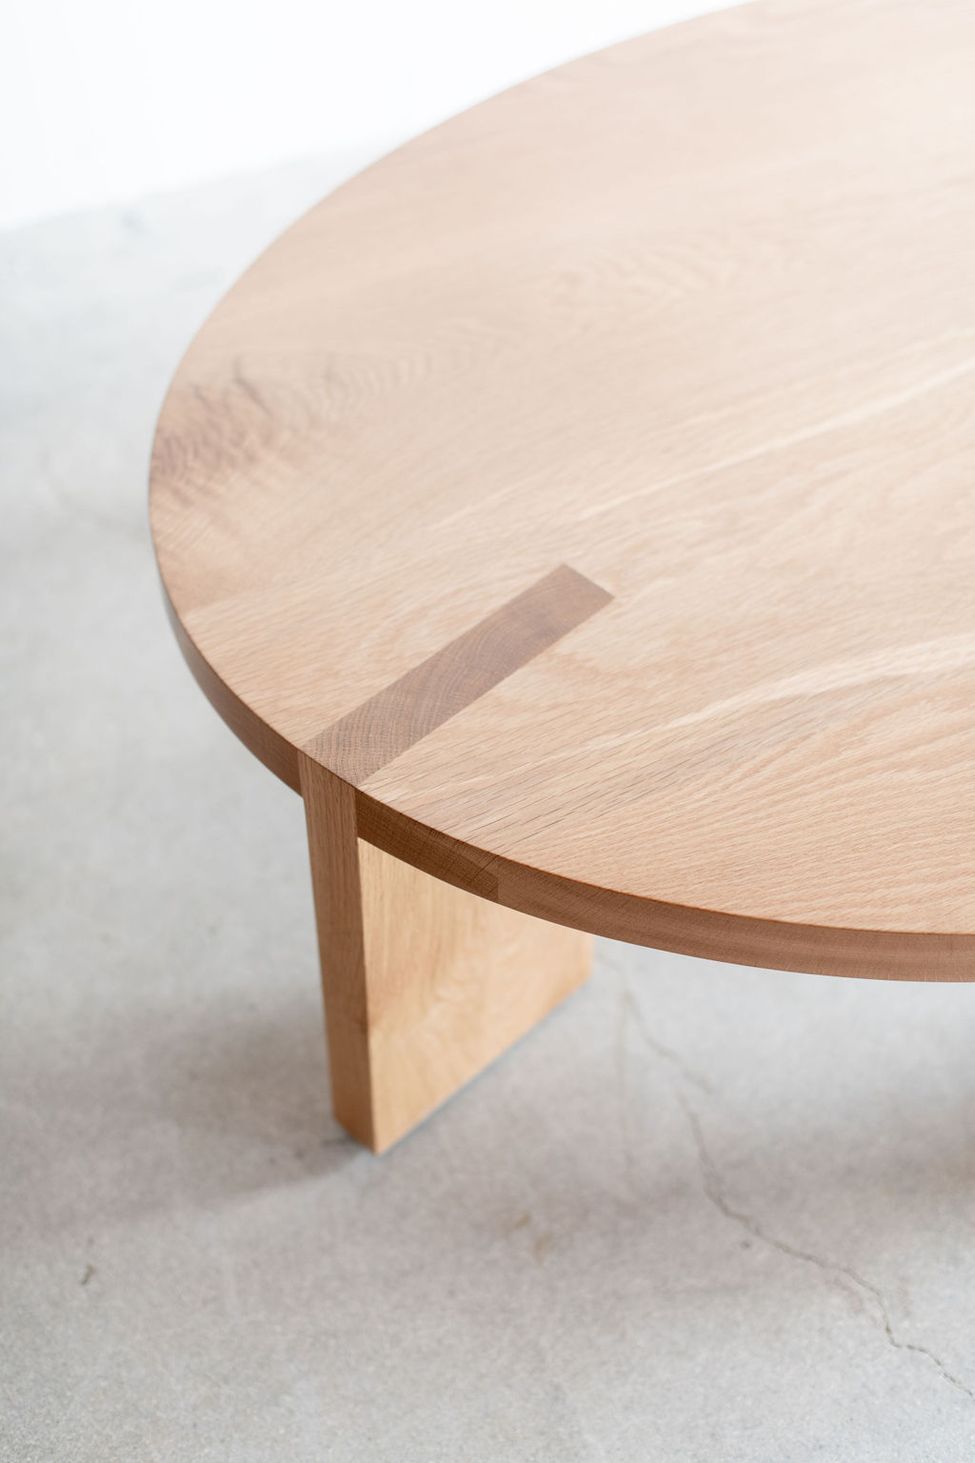 Accent your living room with an solid
oak  coffee table